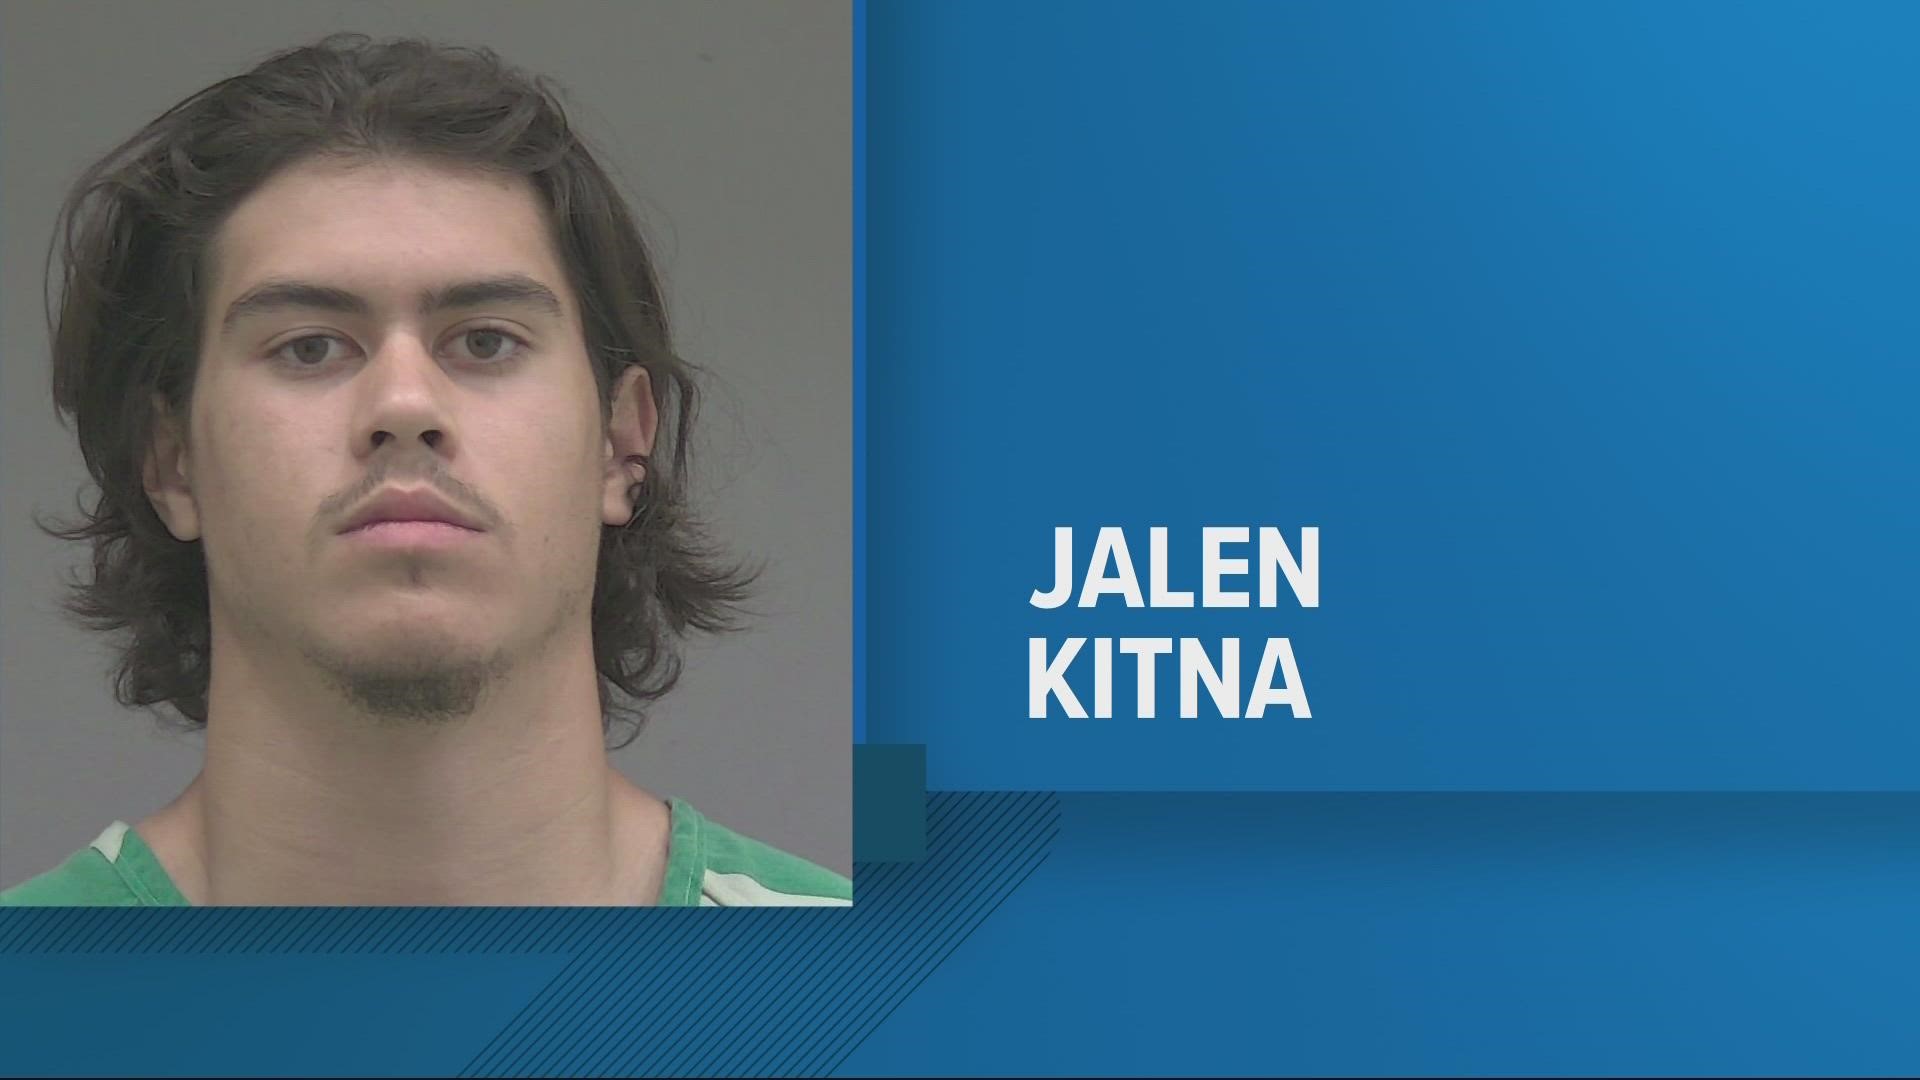 Records indicate that Jalen Kitna was booked into the Alachua County jail around 3:30 p.m Wednesday.